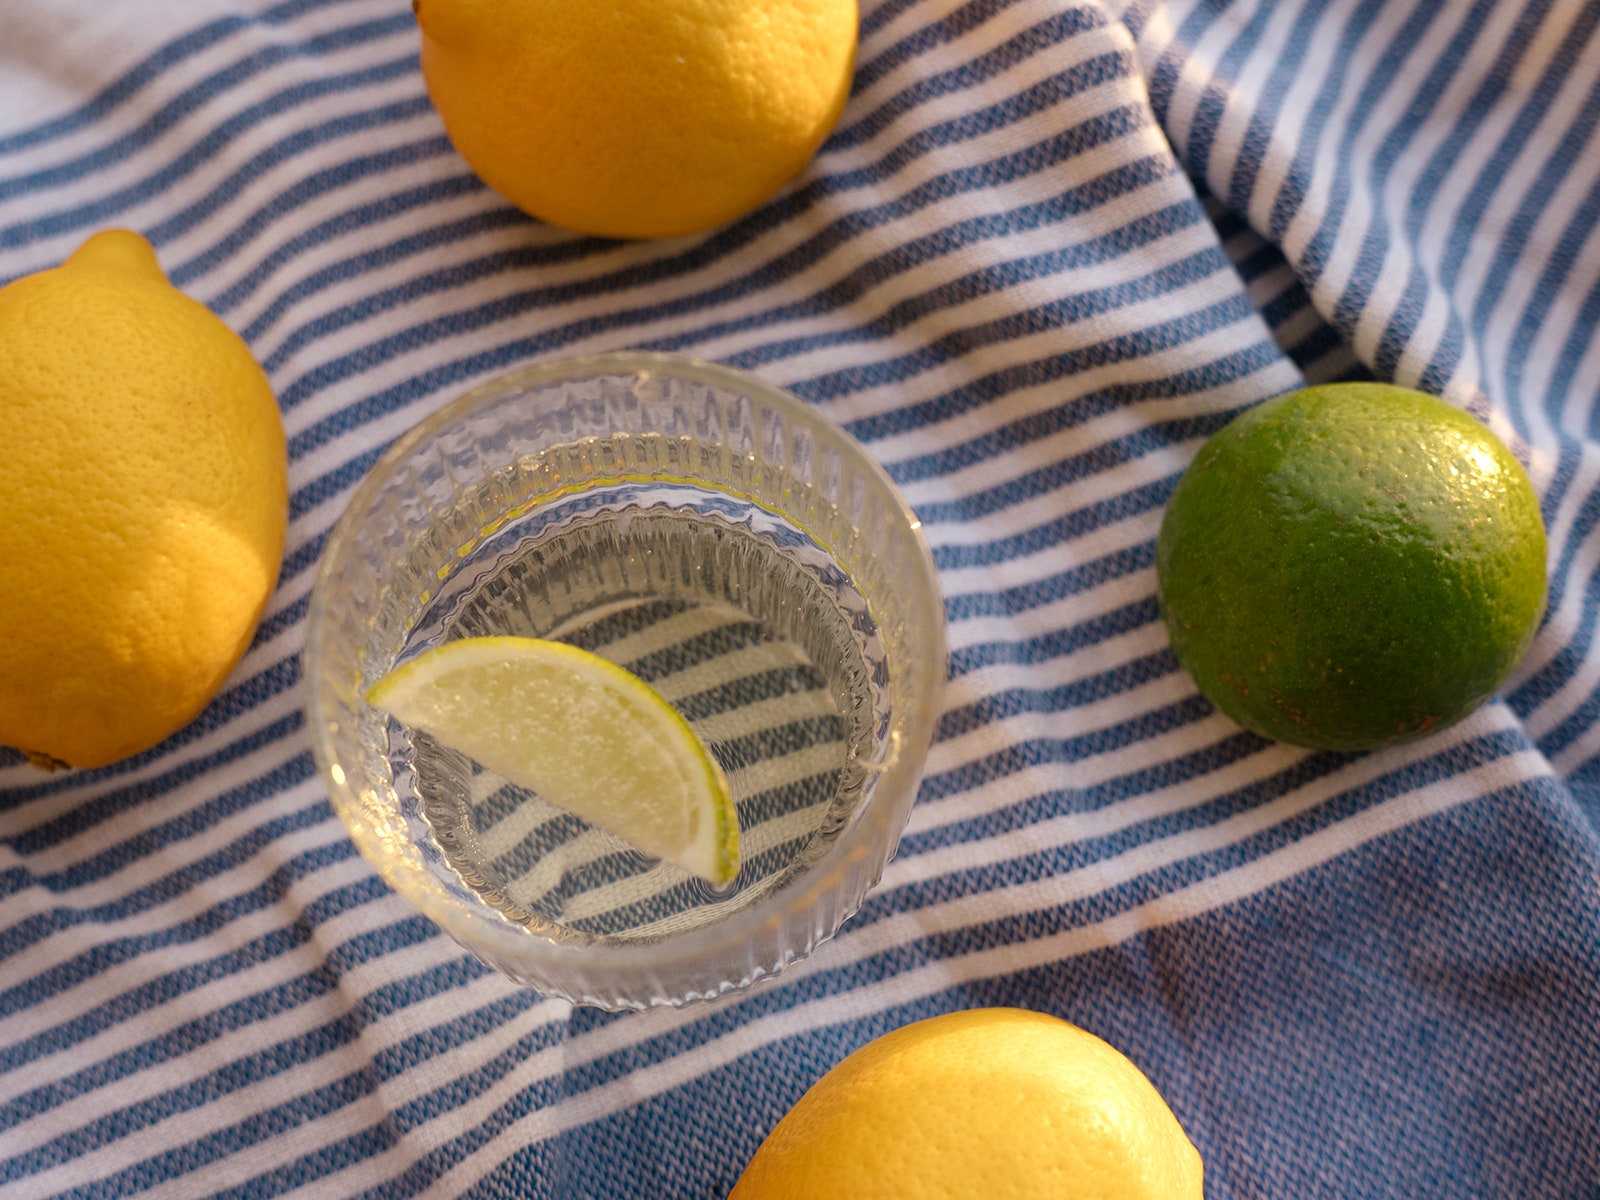 I drank lemon water every day for three months and it curbed my caffeine addiction